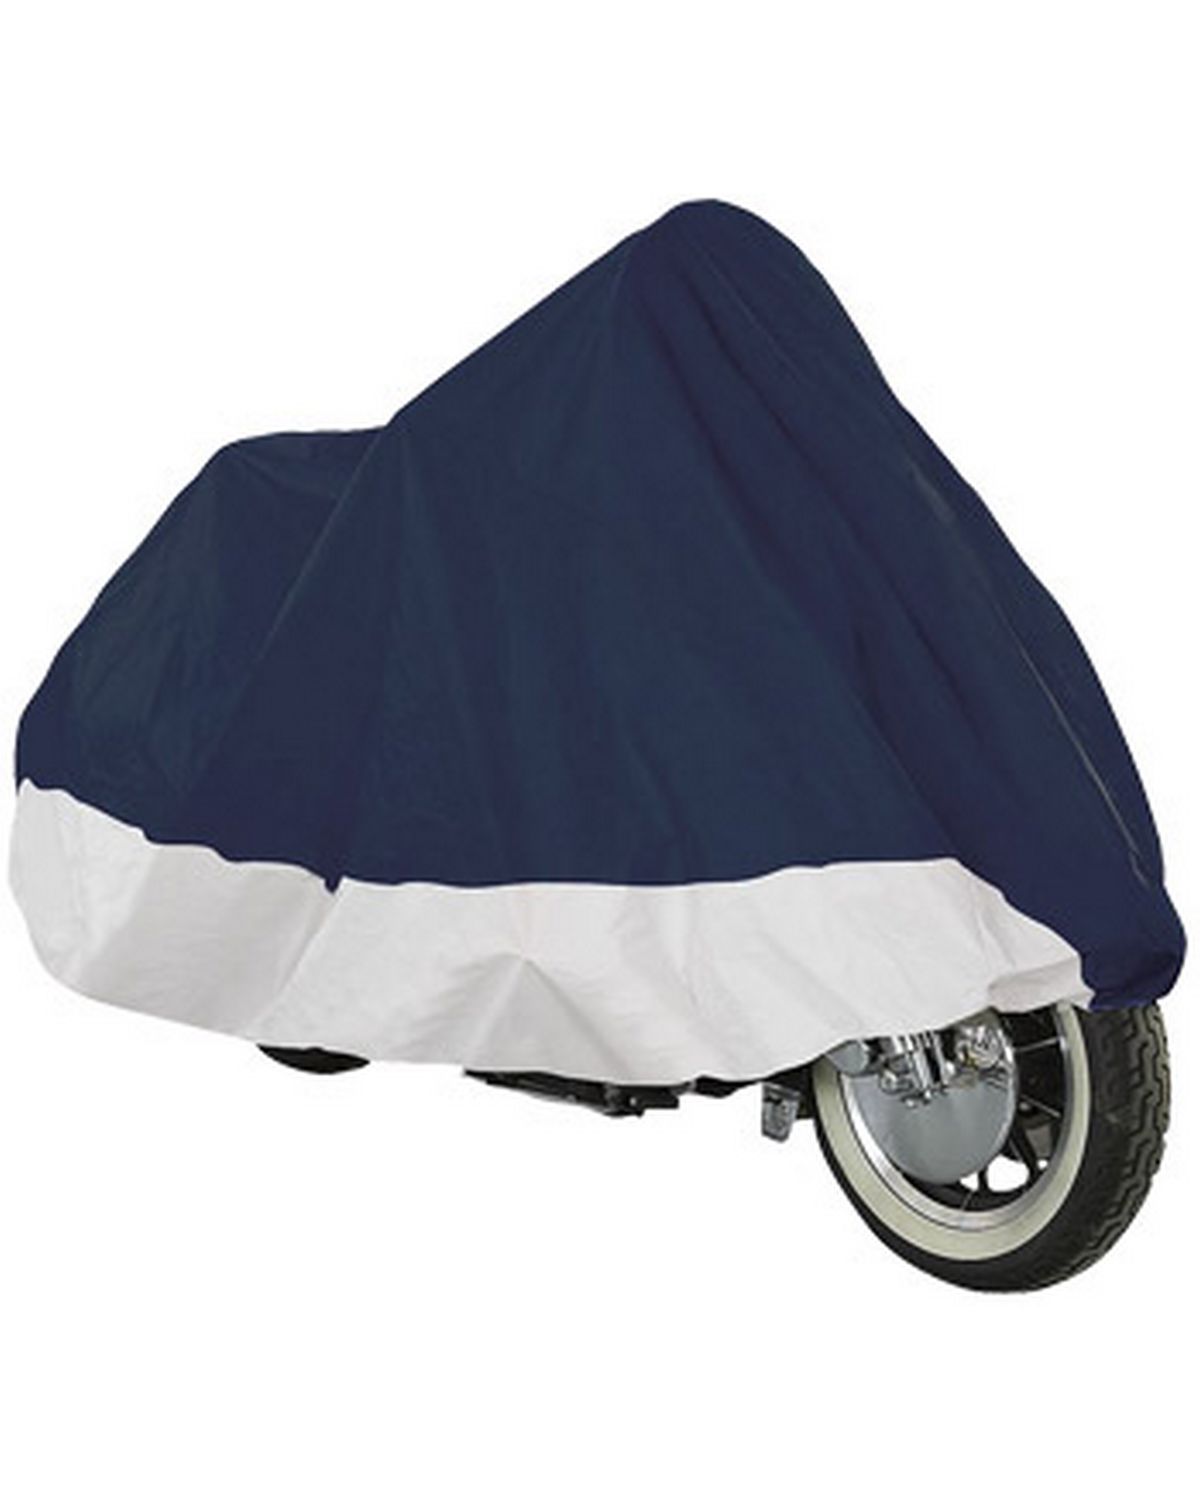 Housse Moto pour Roadster grosse cylindrée Taille XL